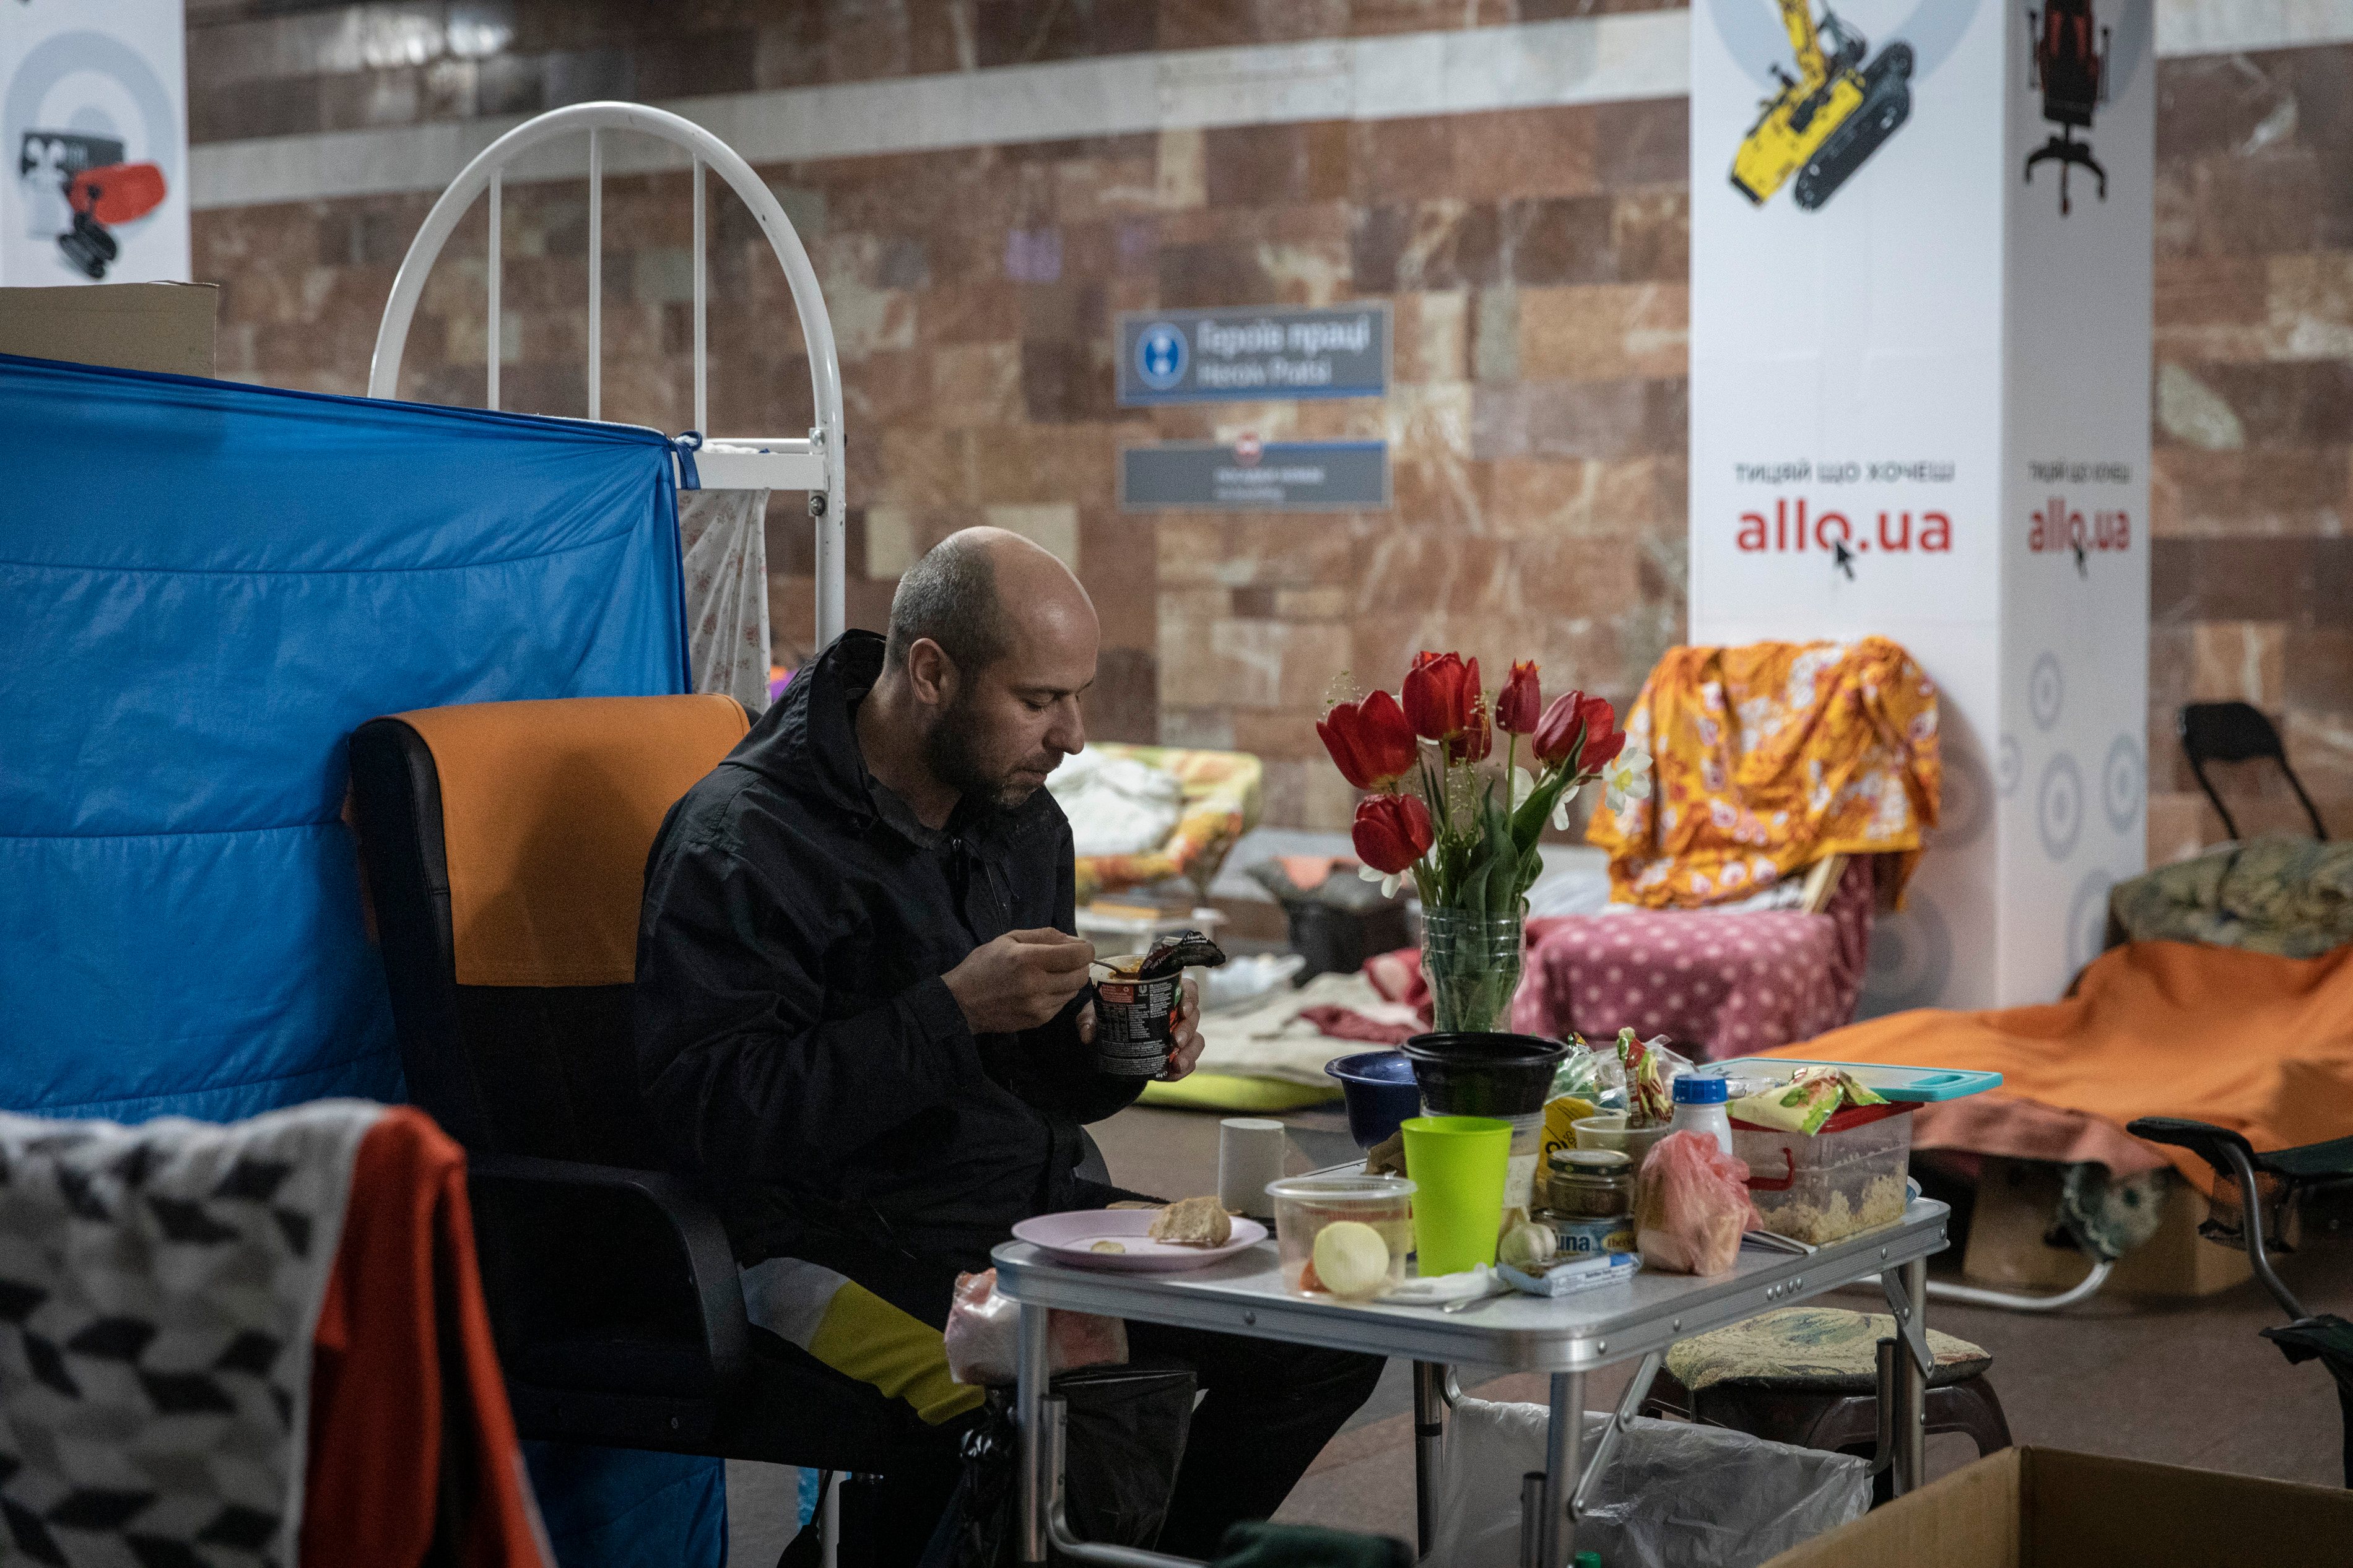 A man eats his meals in the metro station in Kharkiv